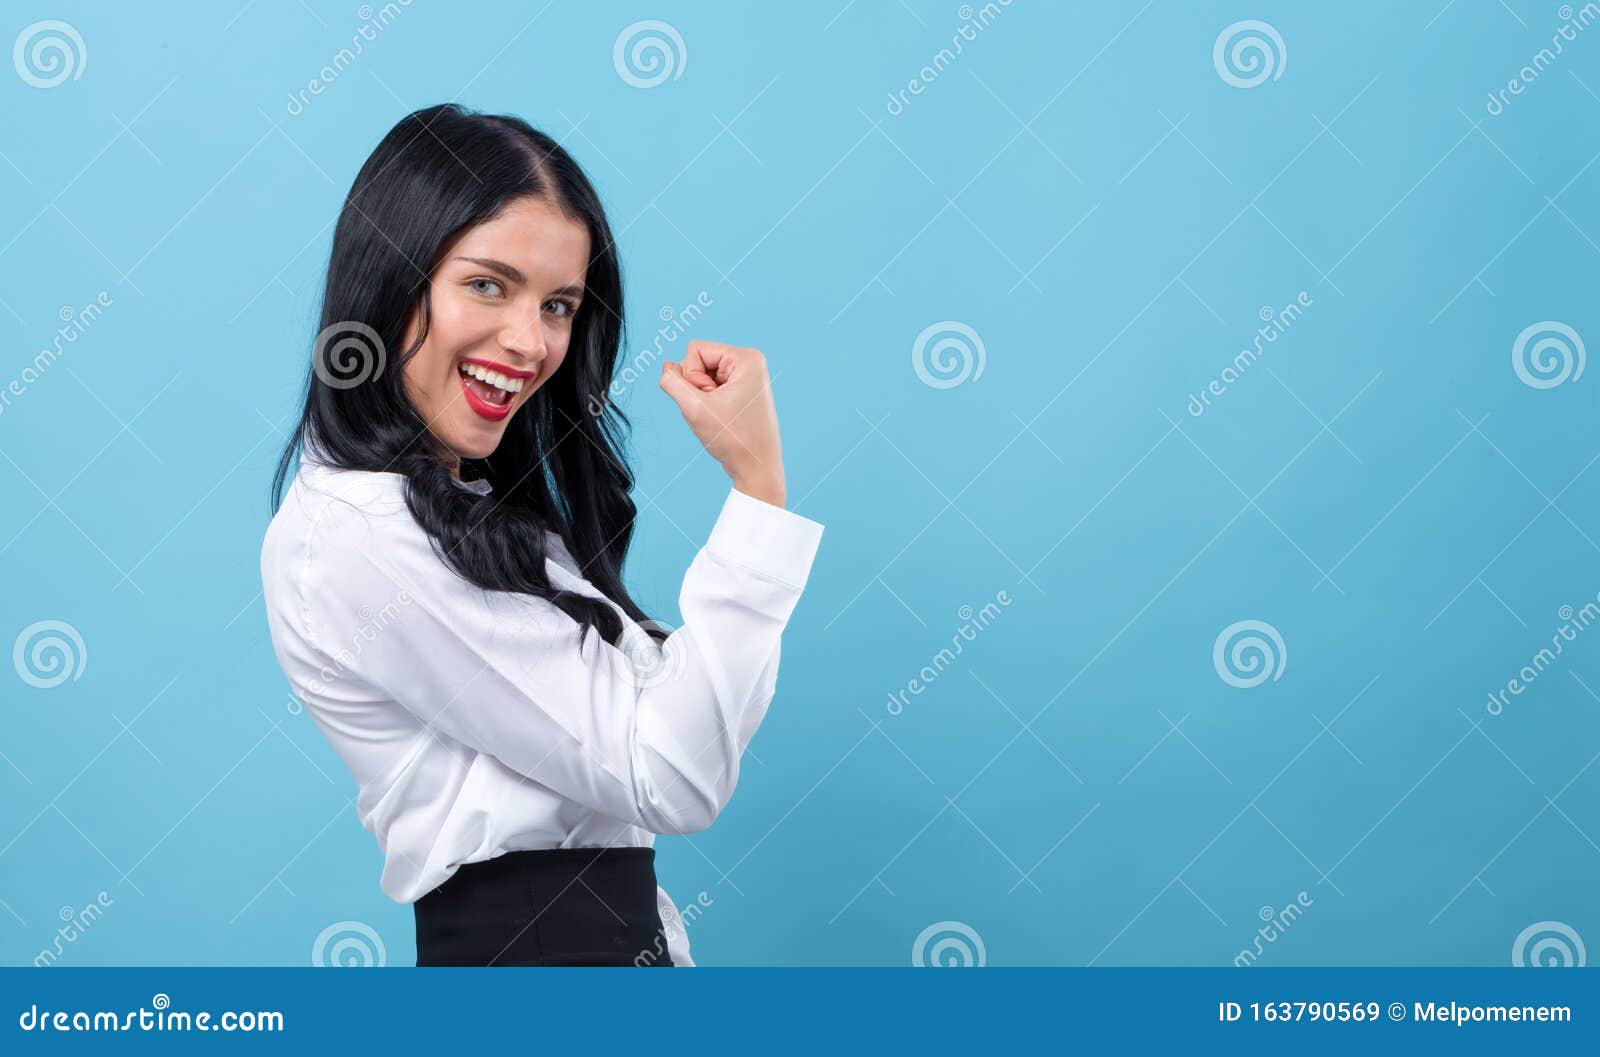 powerful young woman in success pose